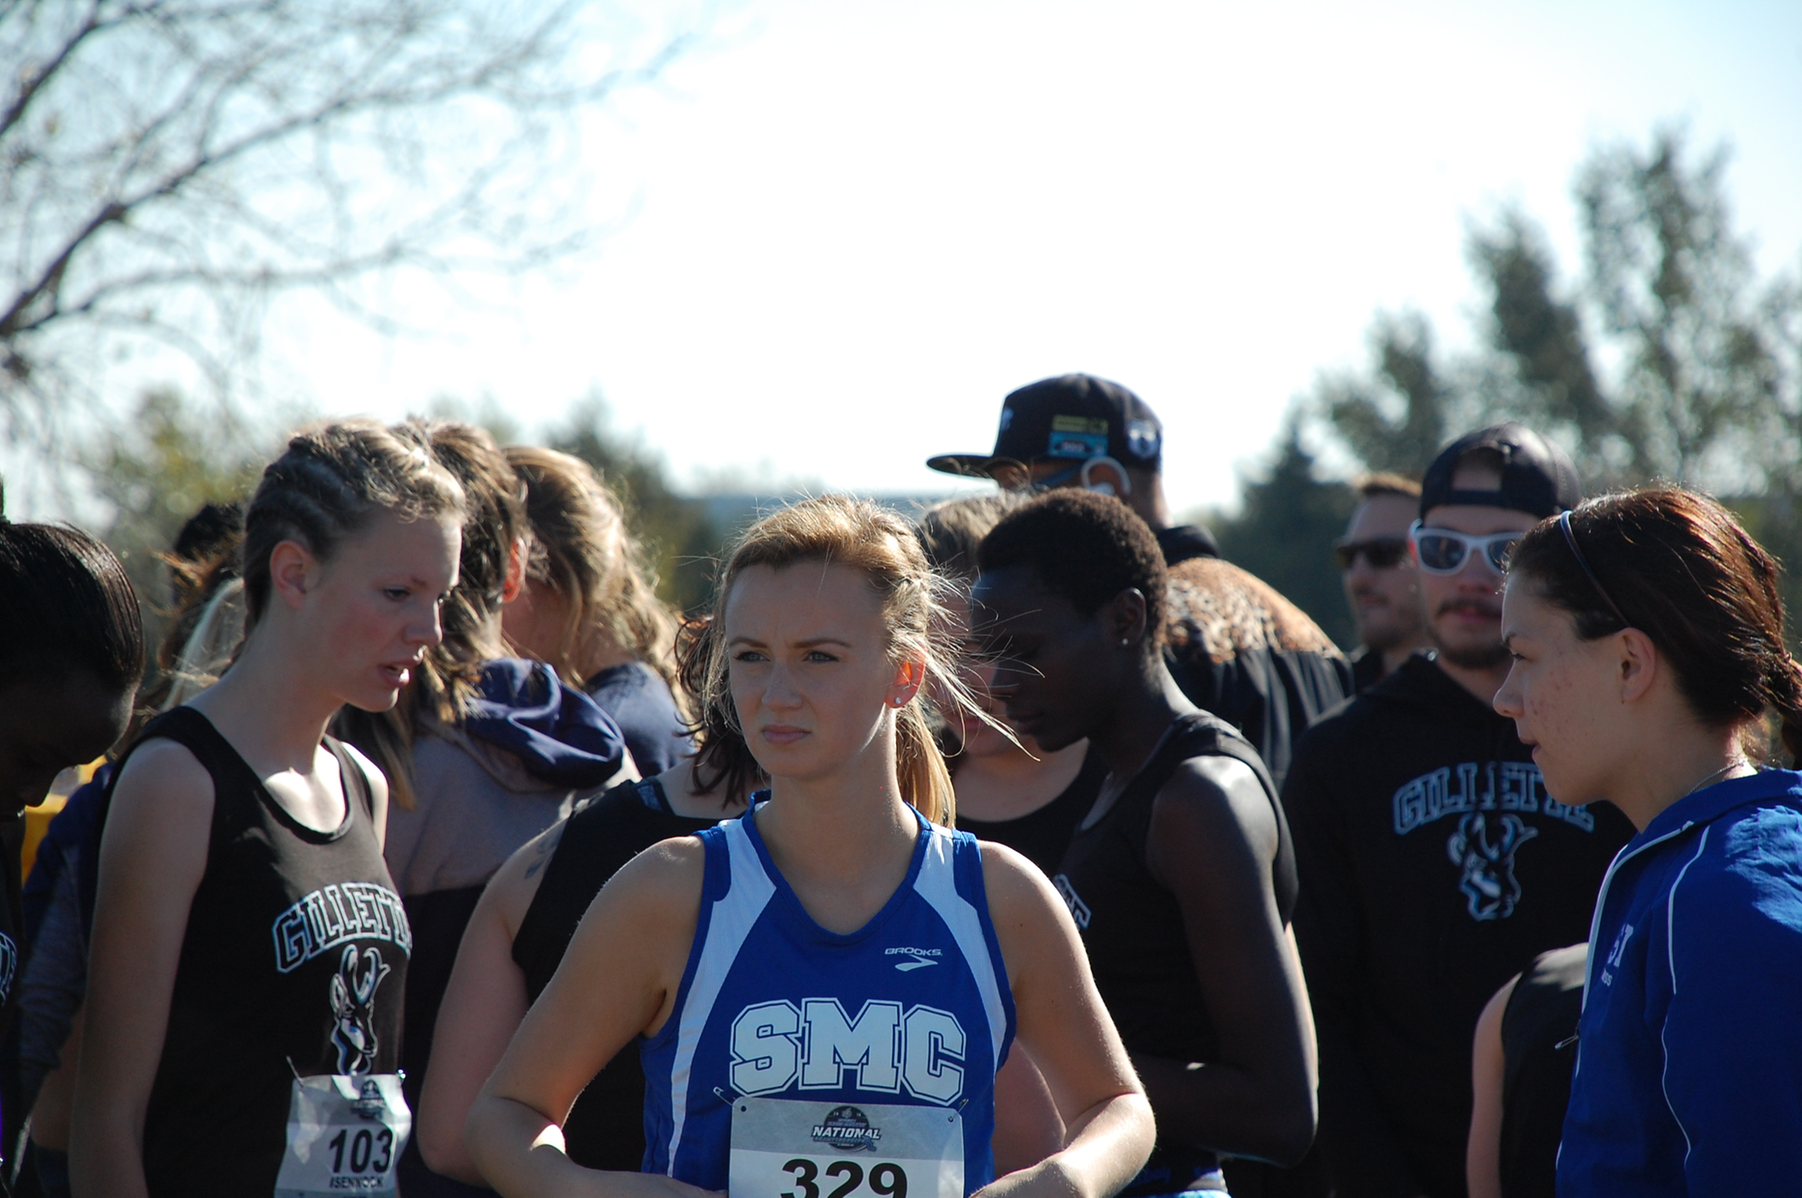 SMC Women's Team competes at NJCAA XC Nationals